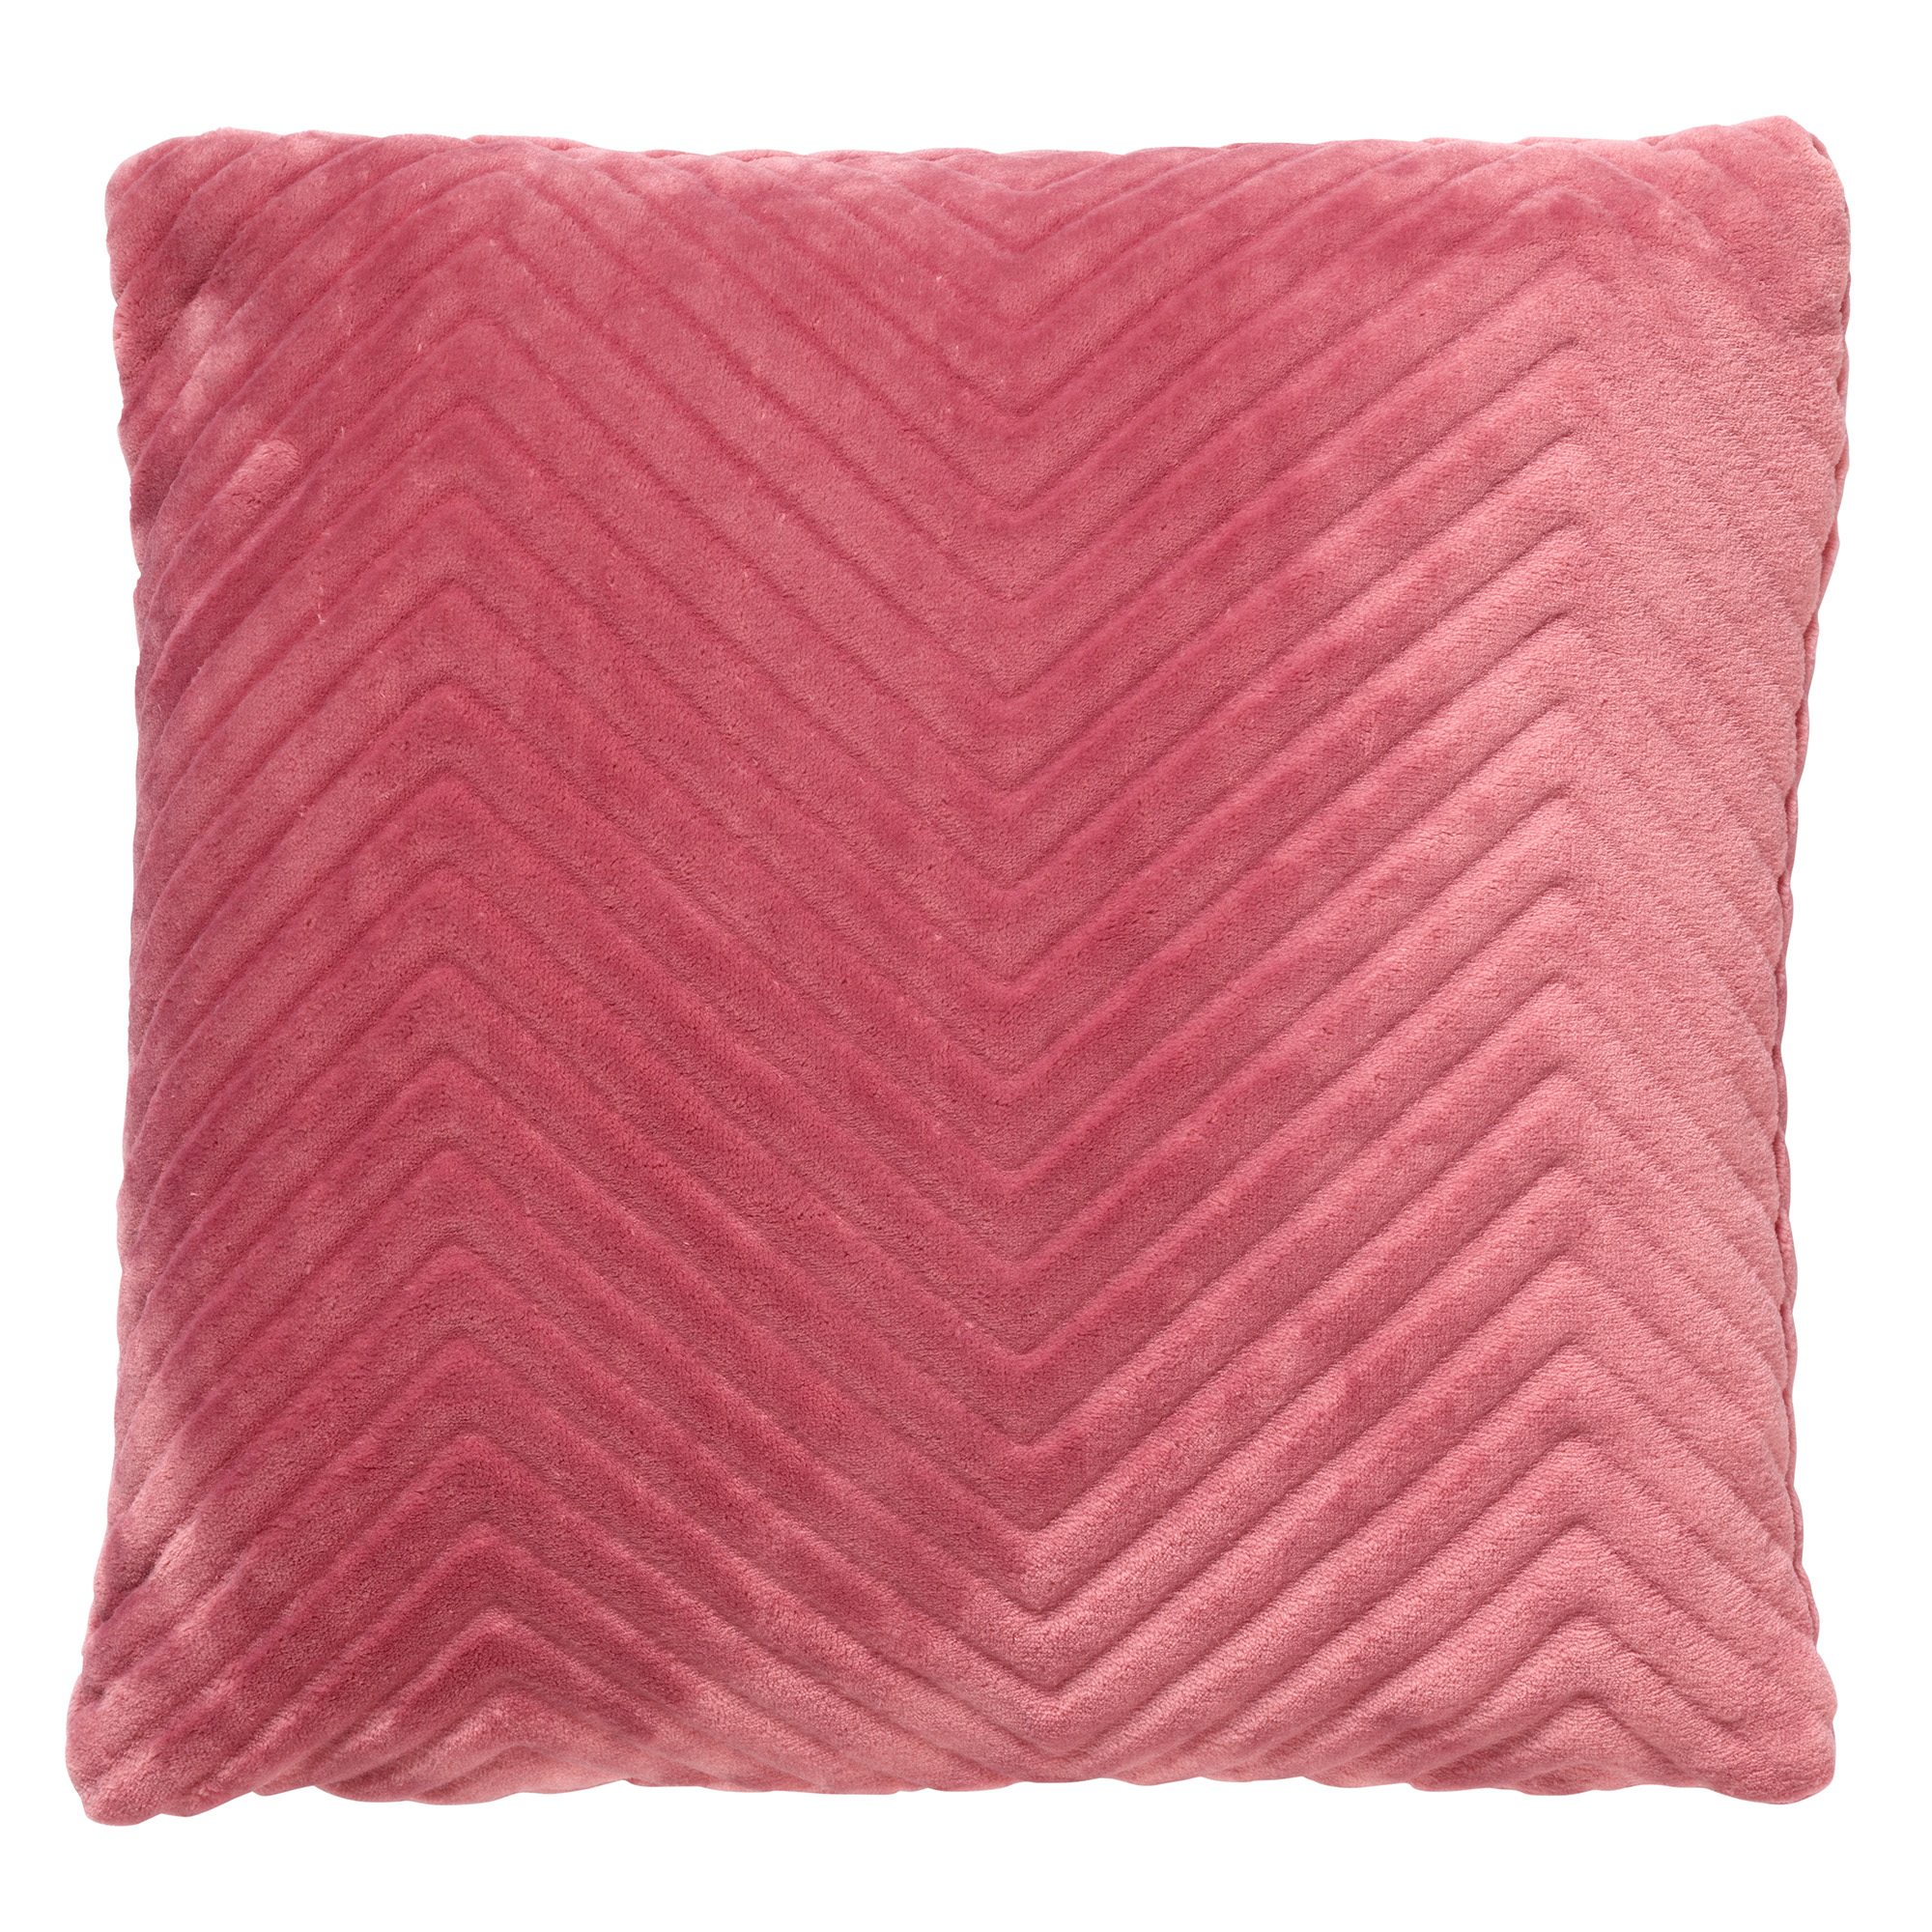 ZICO - Cushion cover with pattern 45x45 cm Dusty Rose